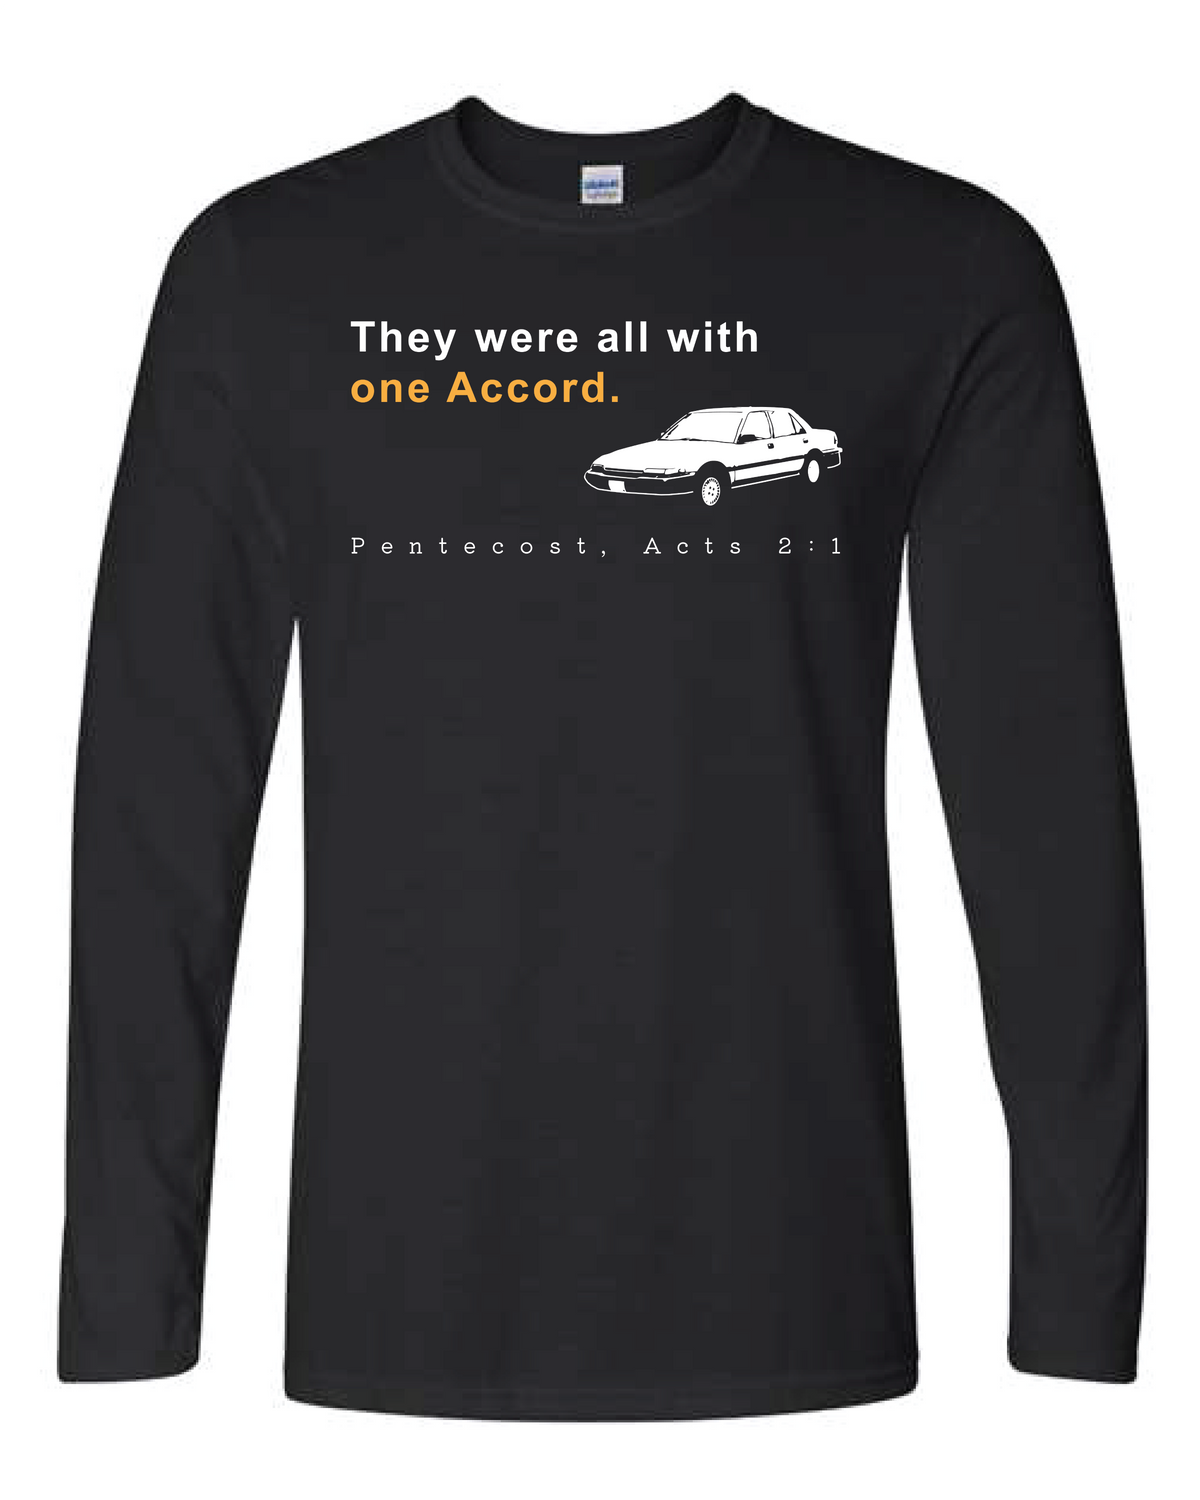 One Accord - Pentecost, Acts 2:1 Long Sleeve T Shirt